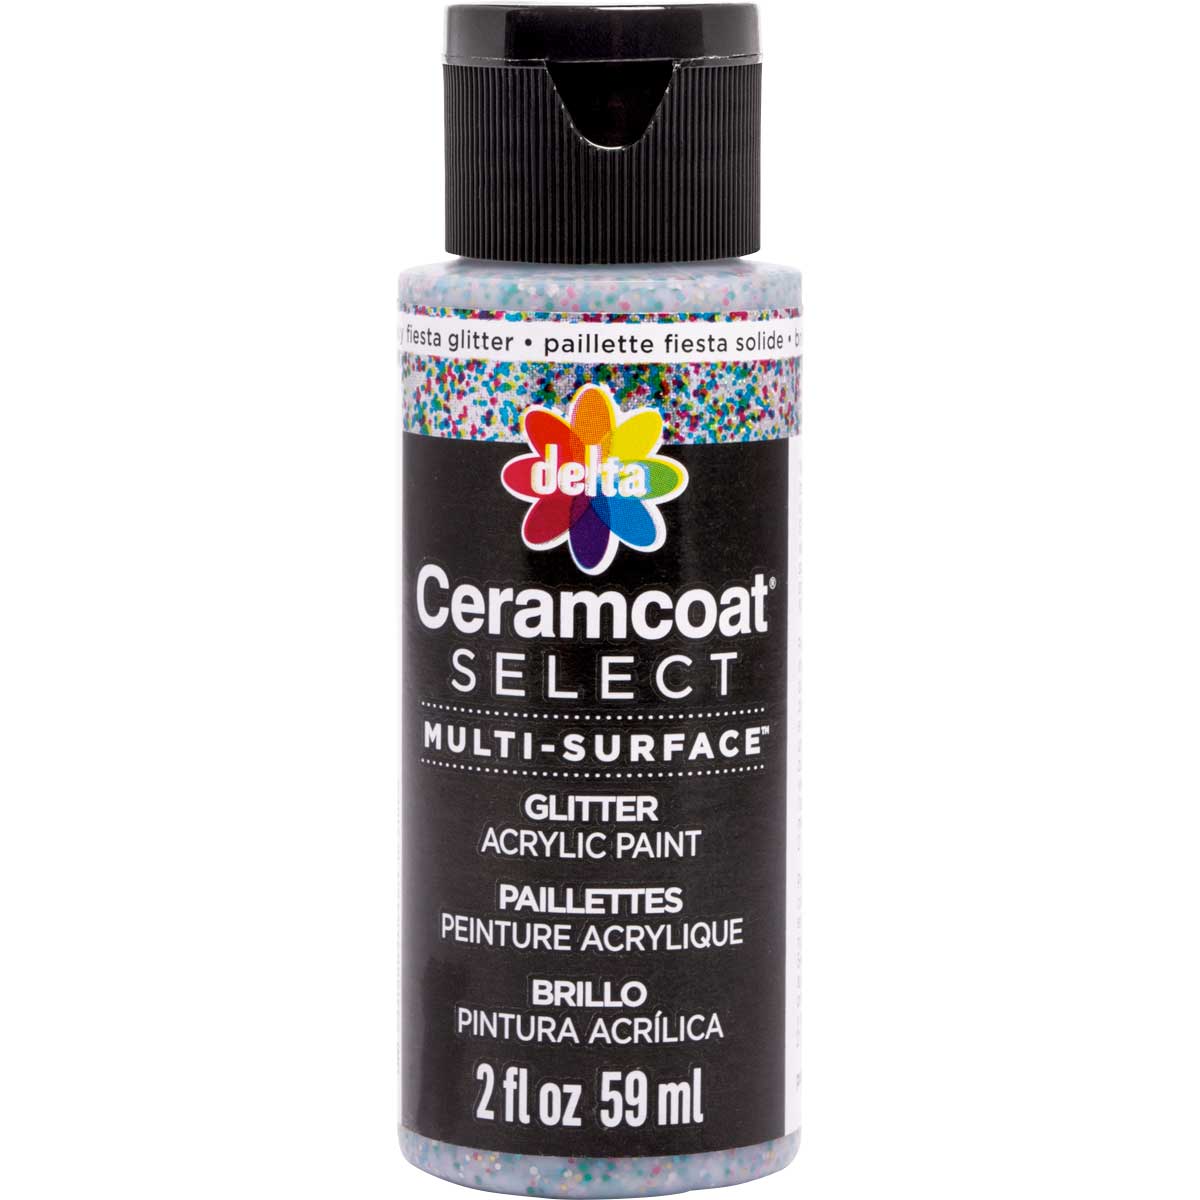 Delta Ceramcoat ® Select Multi-Surface Acrylic Paint - Glitter - Chunky Fiesta Silver, 2 oz. - 04117